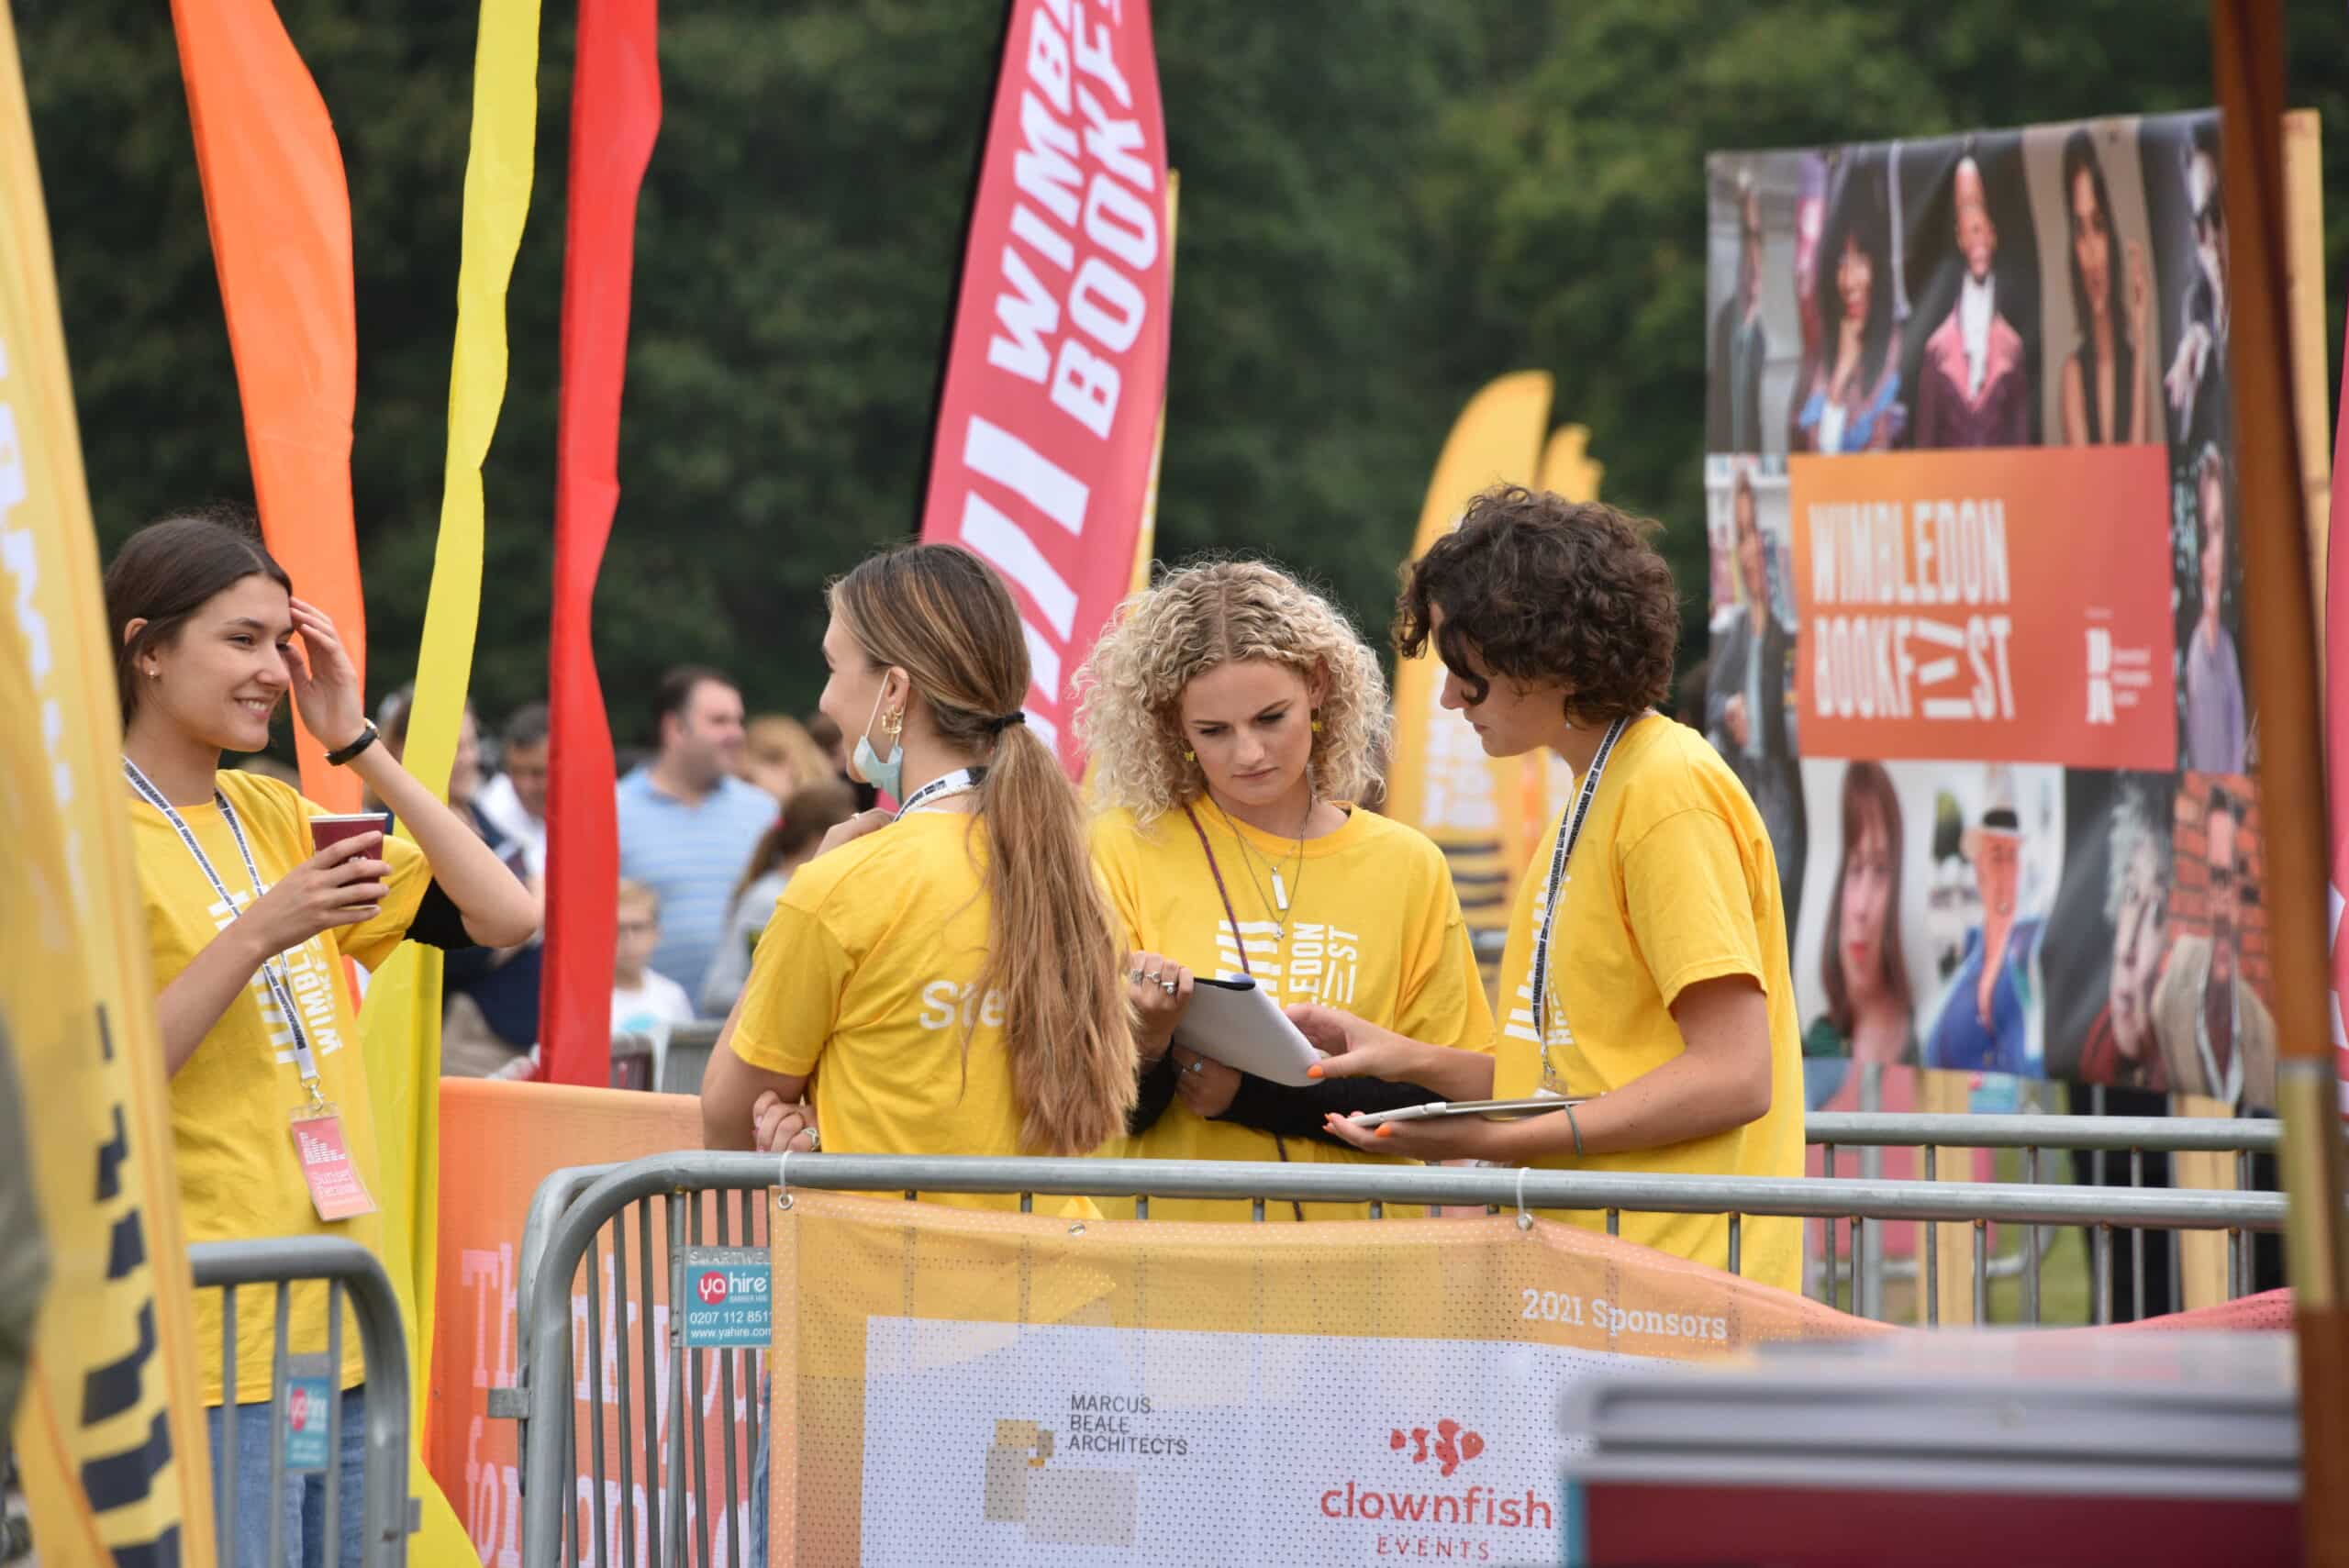 A group of staff members behind barriers at the Wimbledon Book Fest